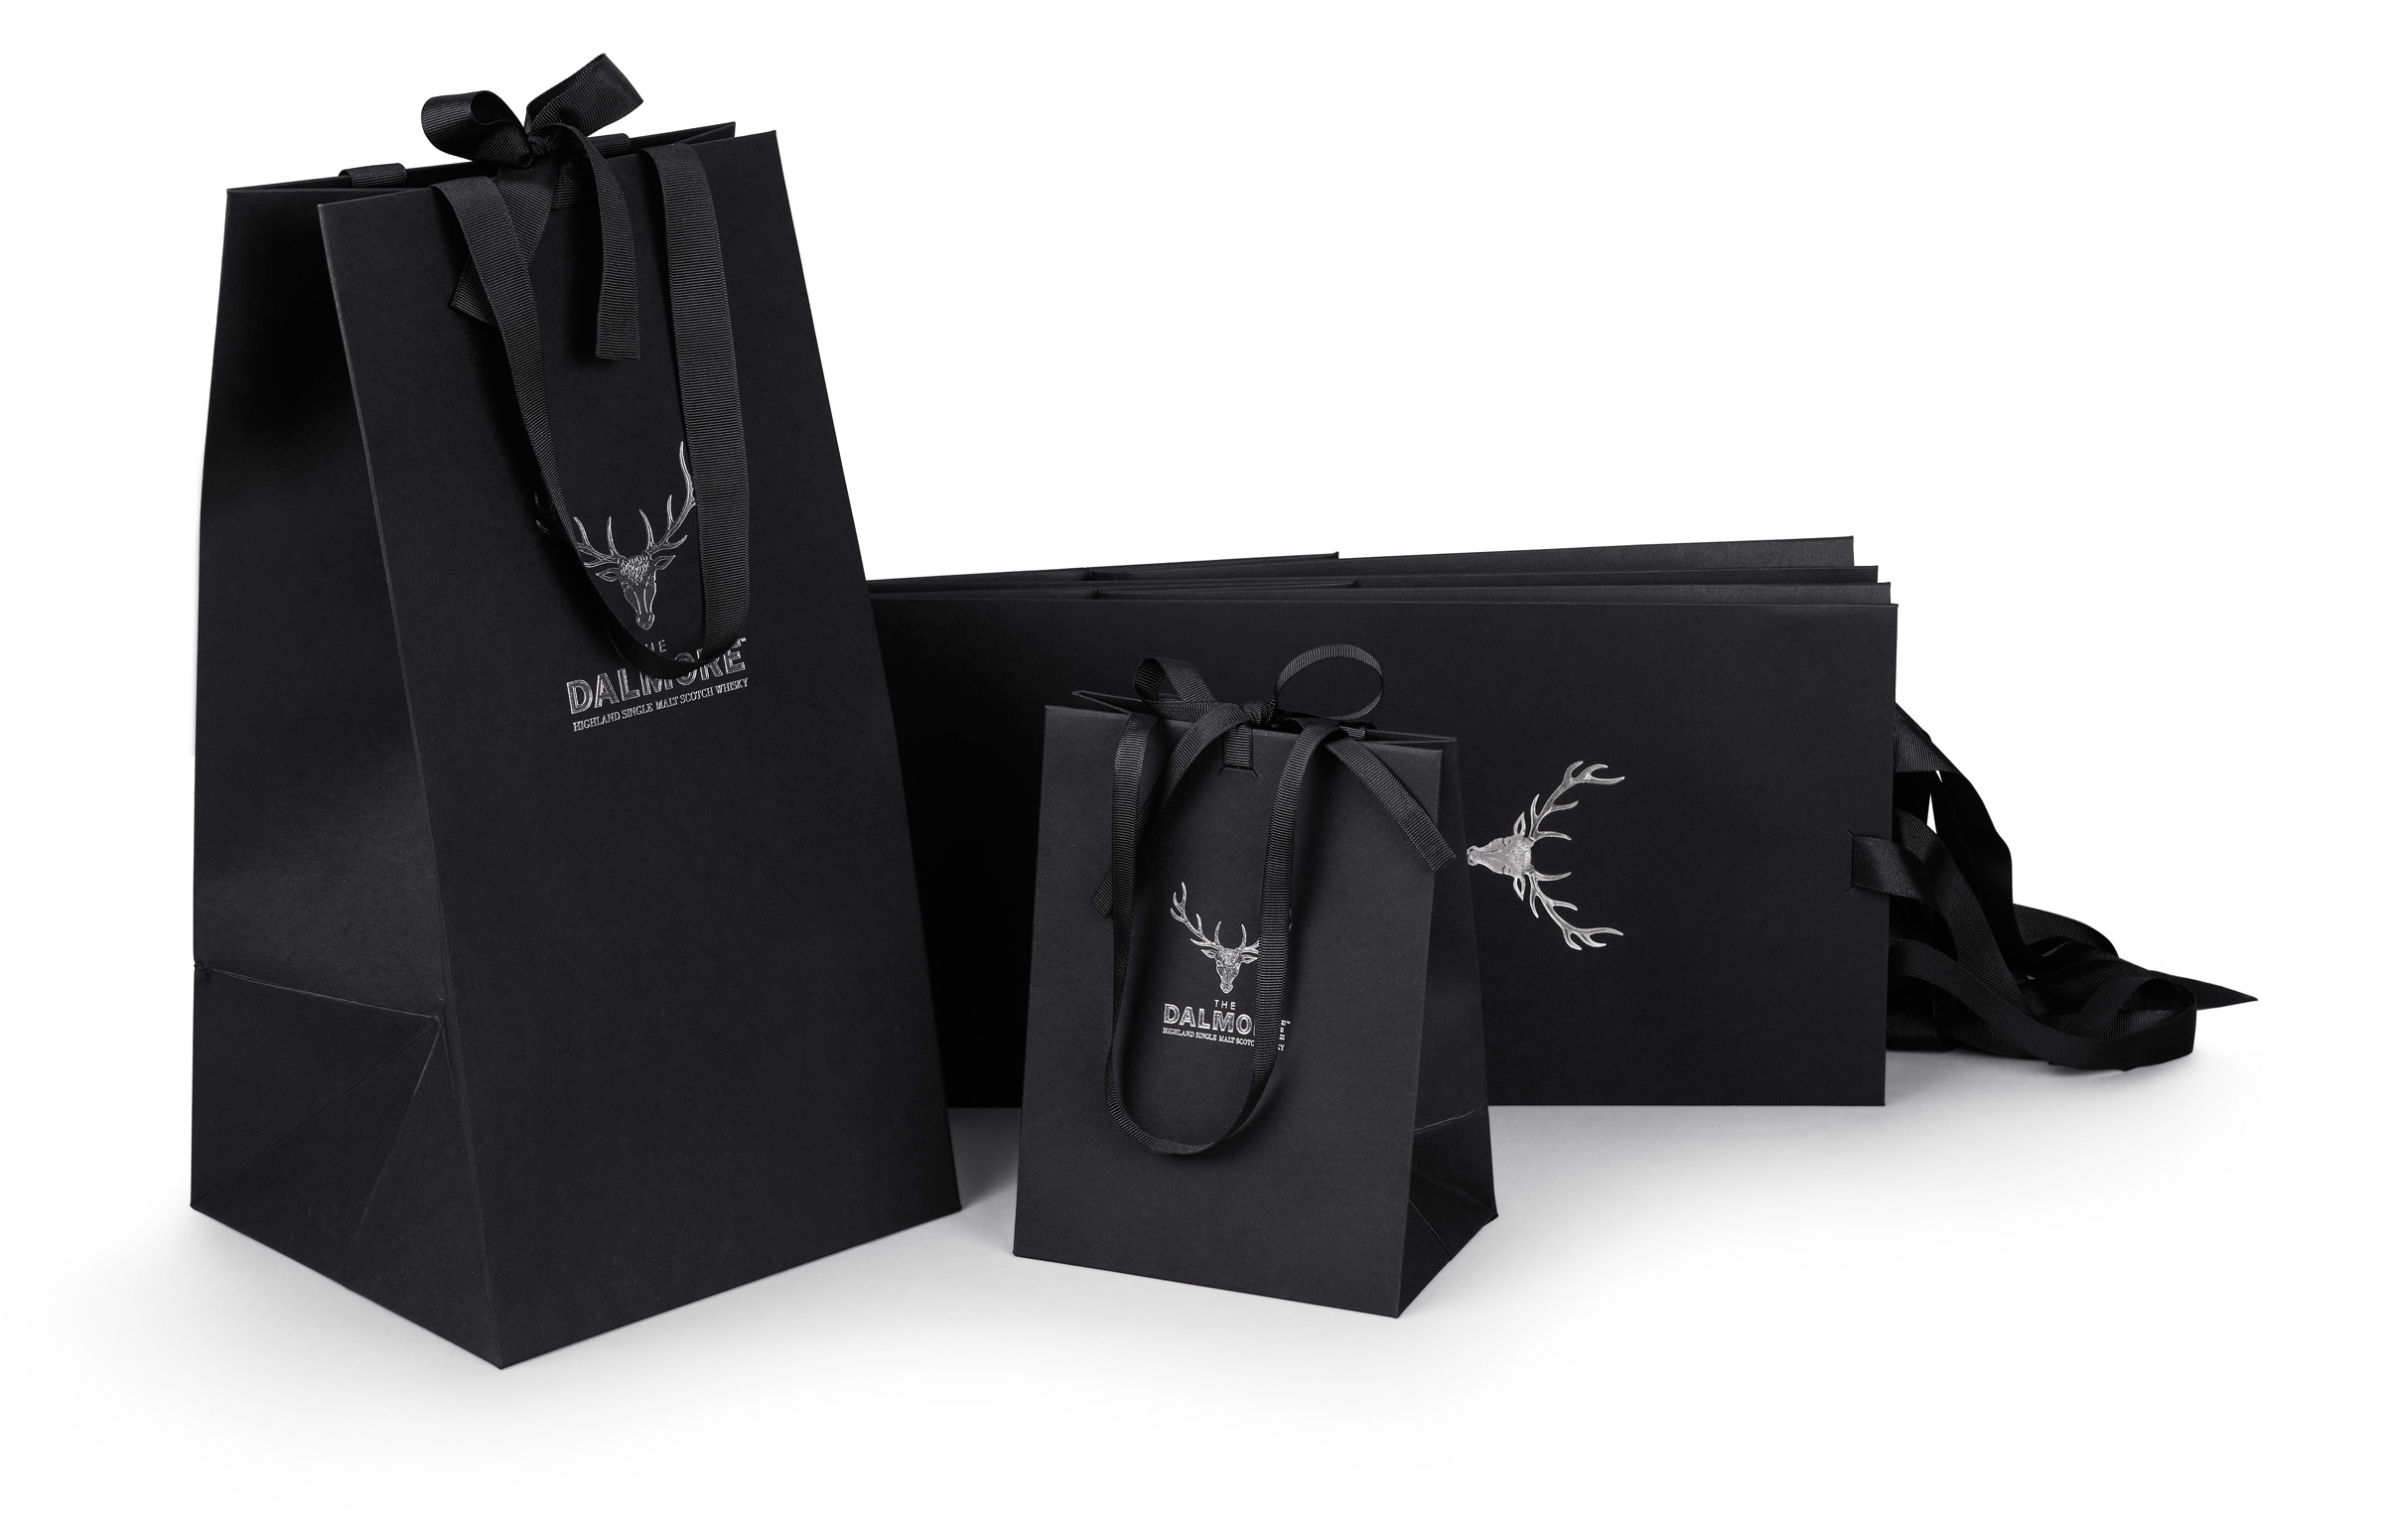 Promotional bag for liquors the Dalmore